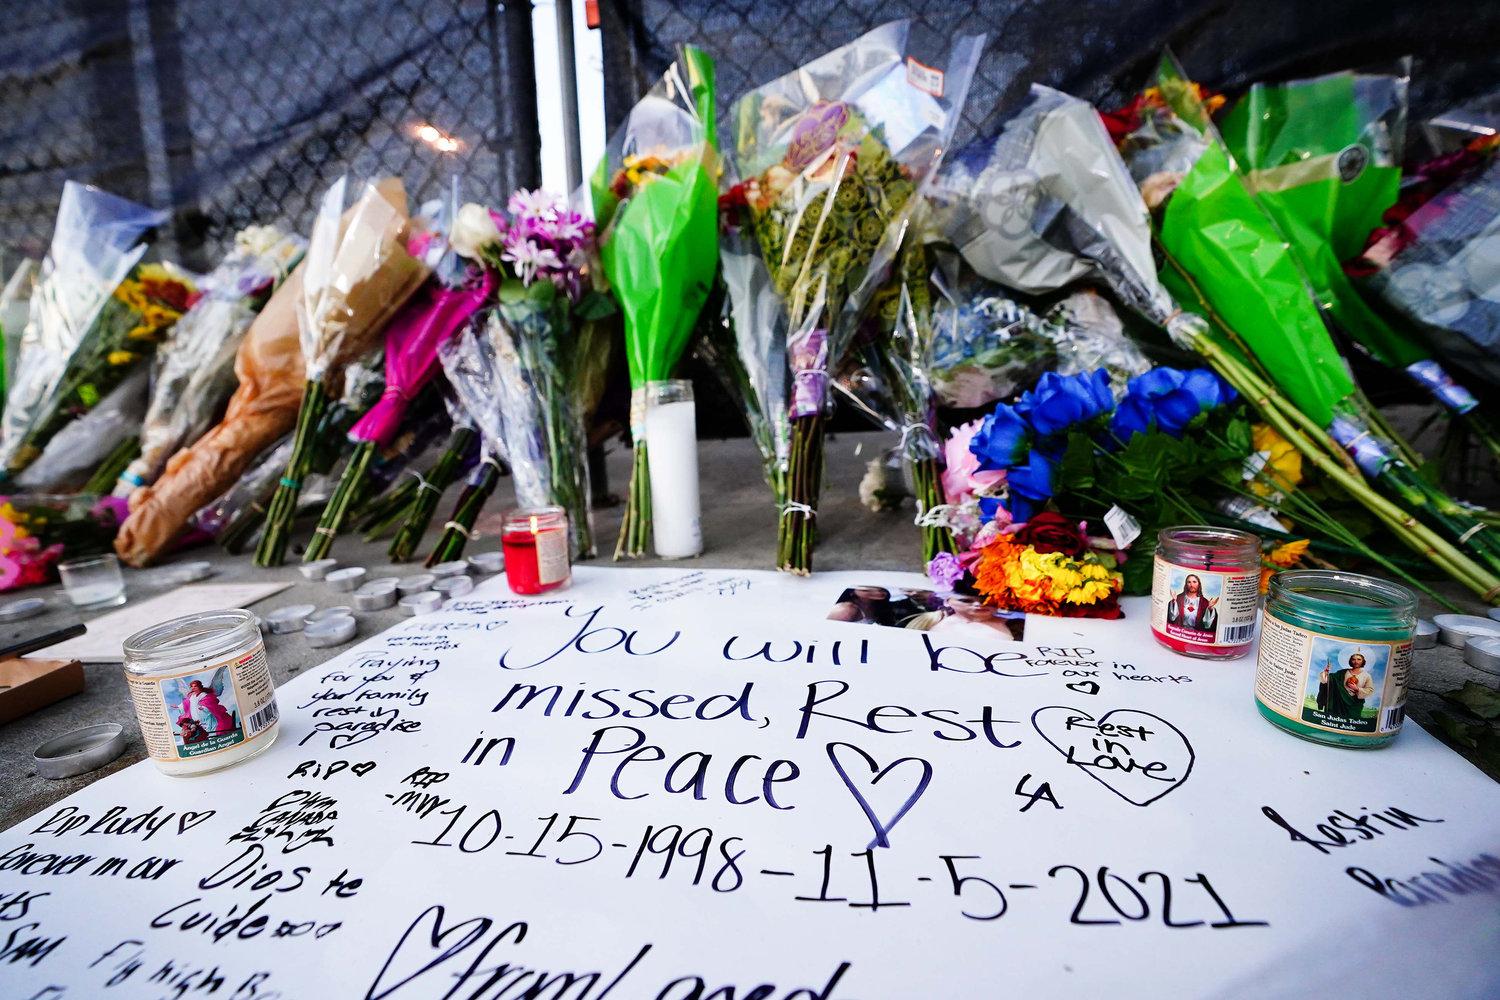 Candles, flowers and letters are placed at a memorial outside of the canceled Astroworld festival at NRG Park on Nov. 7, 2021, in Houston. According to authorities, eight people died and 17 people were transported to local hospitals after what was described as a crowd surge at the Astroworld festival, a music festival started by Houston-native rapper and musician Travis Scott in 2018. (Alex Bierens de Haan/Getty Images/TNS)